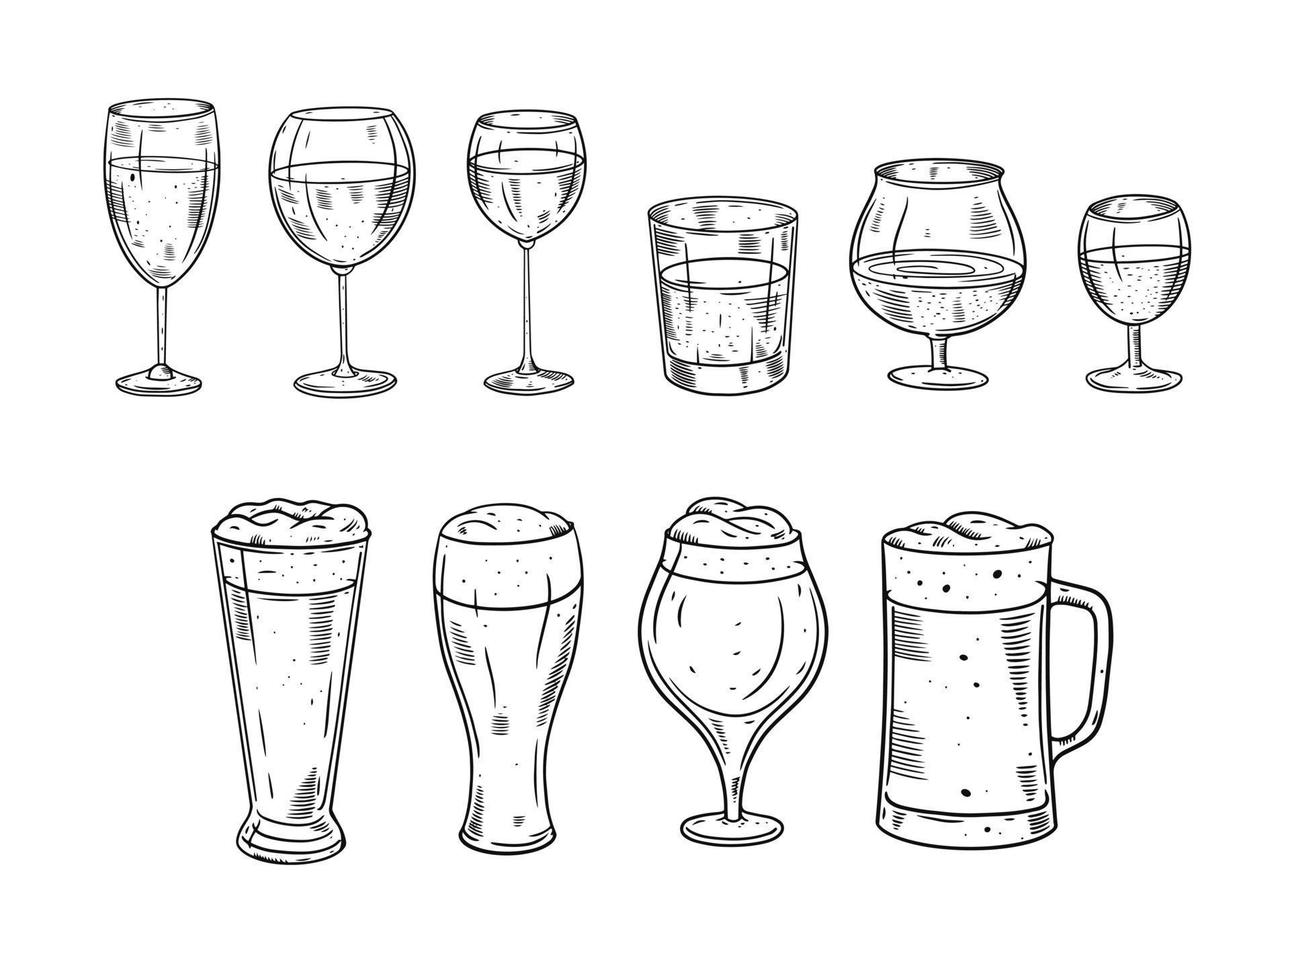 Hand drawn glasses cocktails and beer set. Black and white sketch style vector illustration.